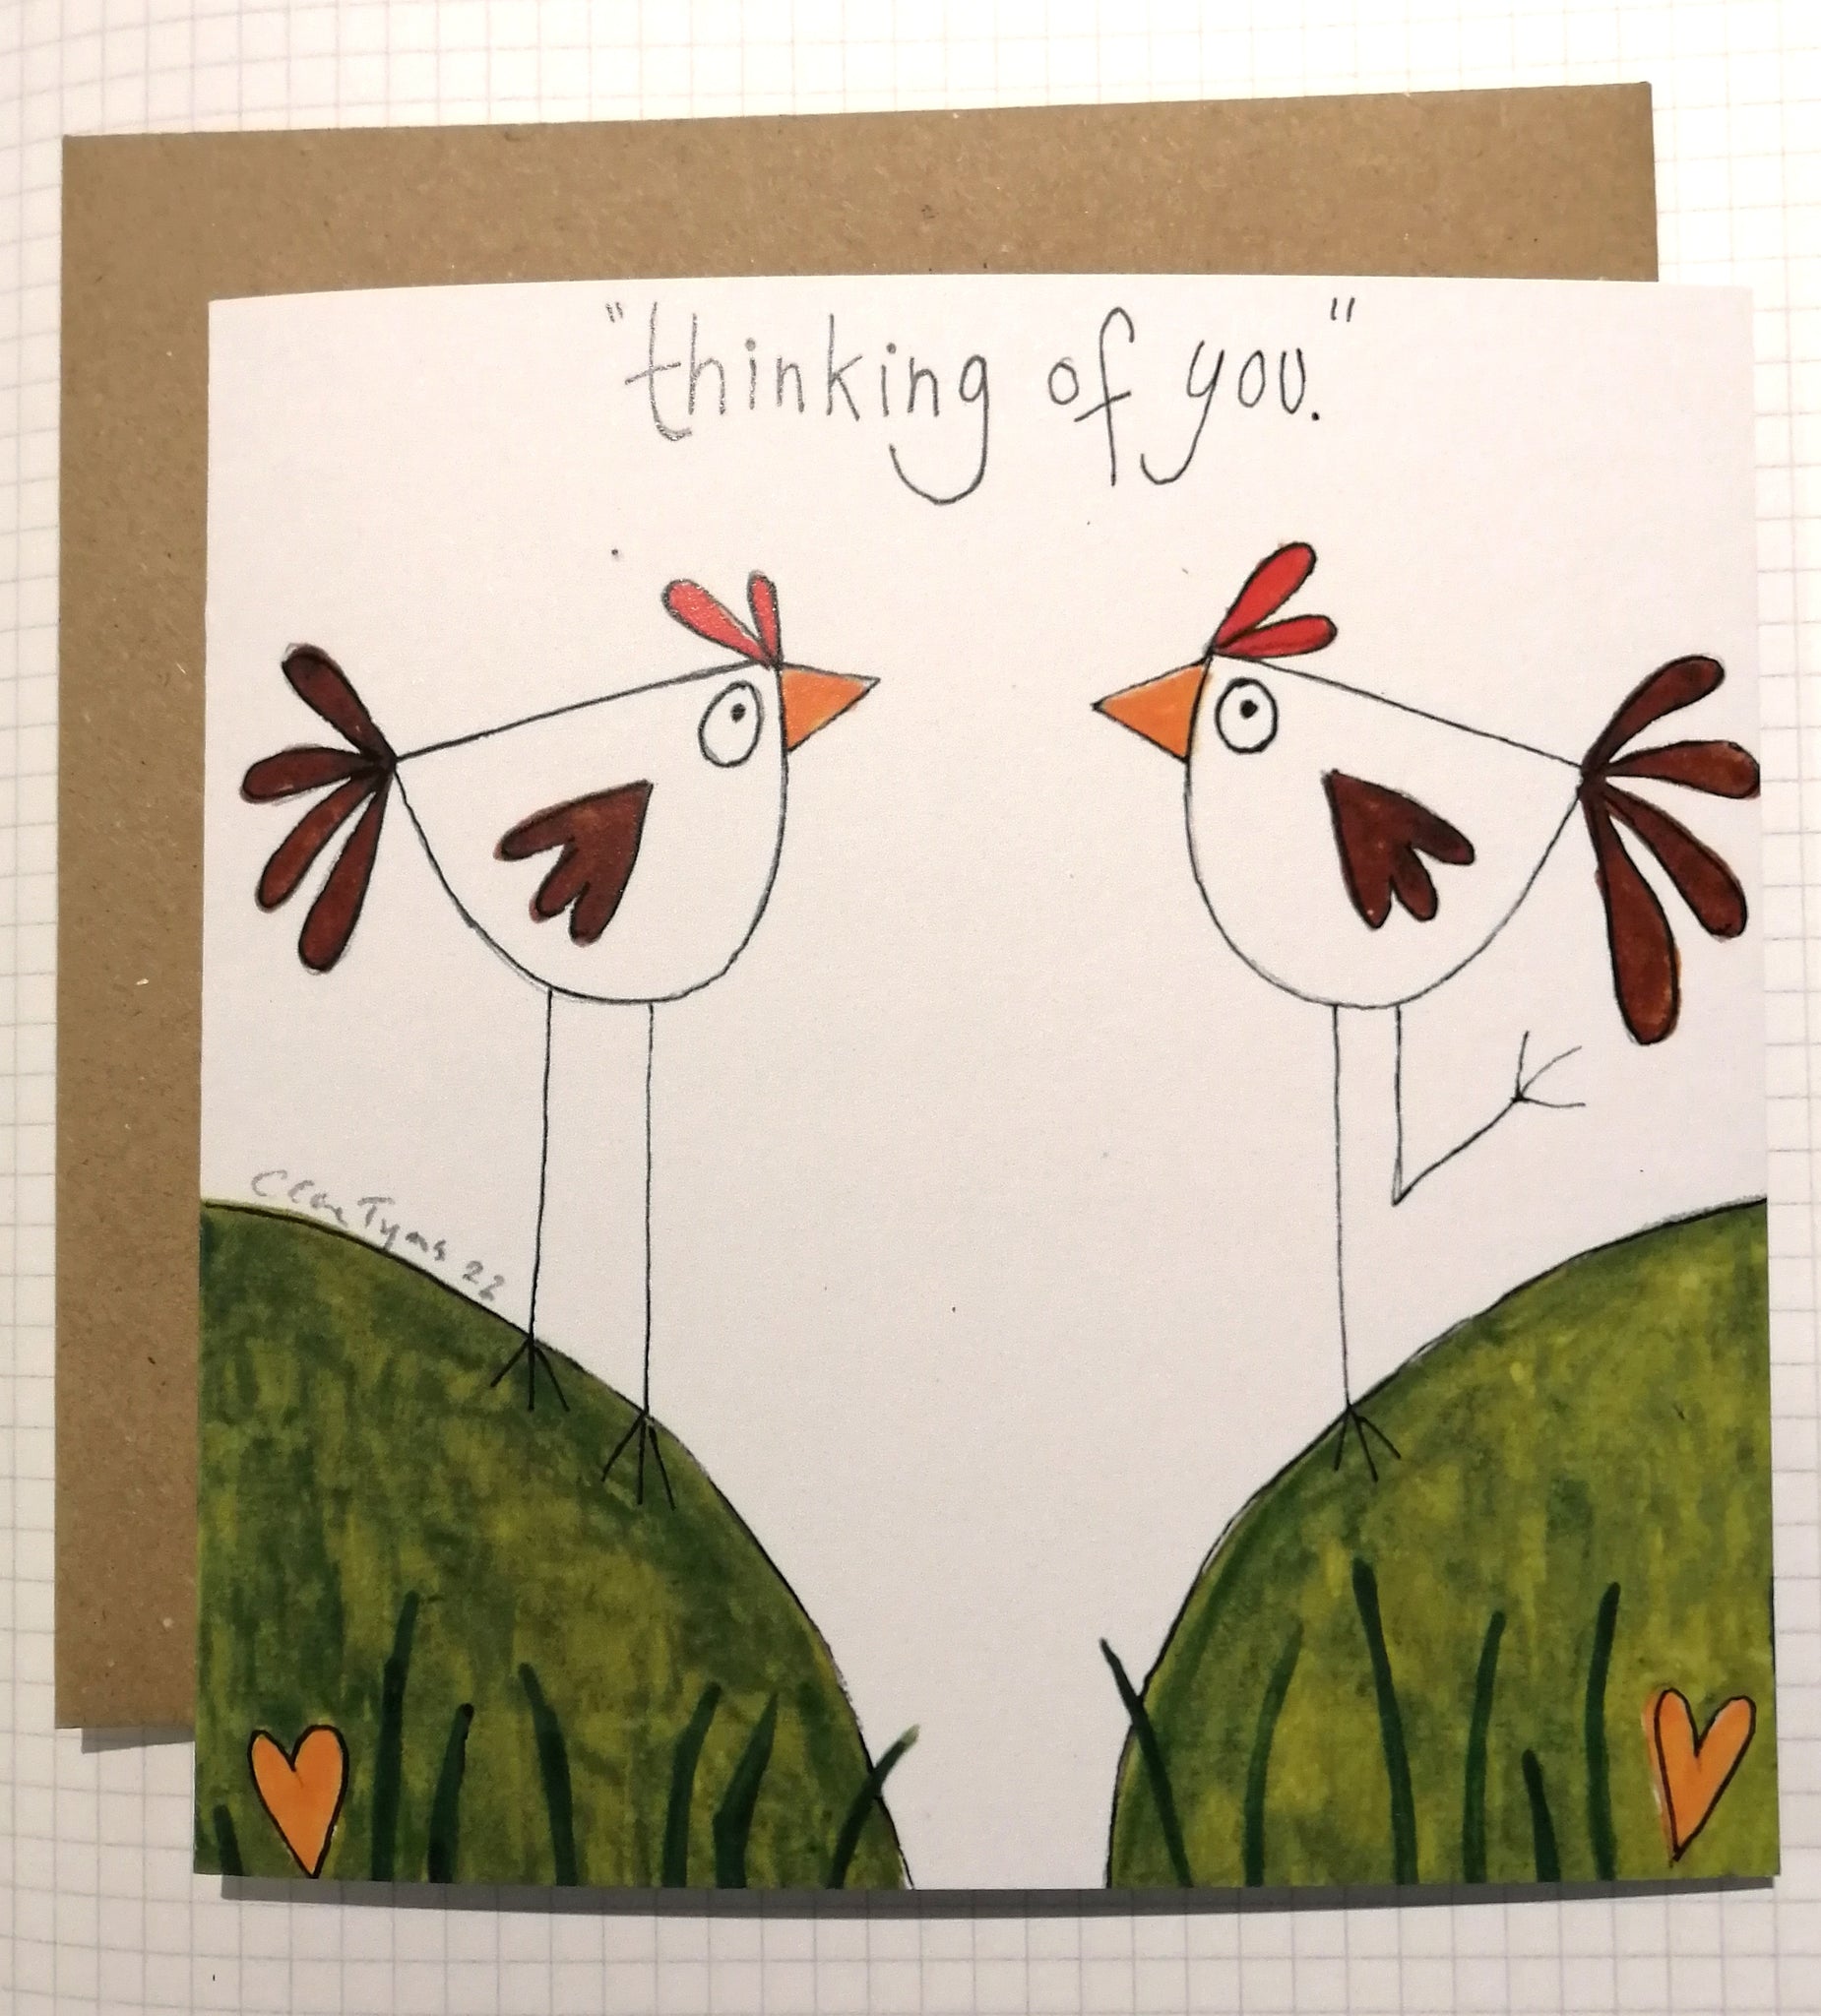 Thinking of you. Greetings card.